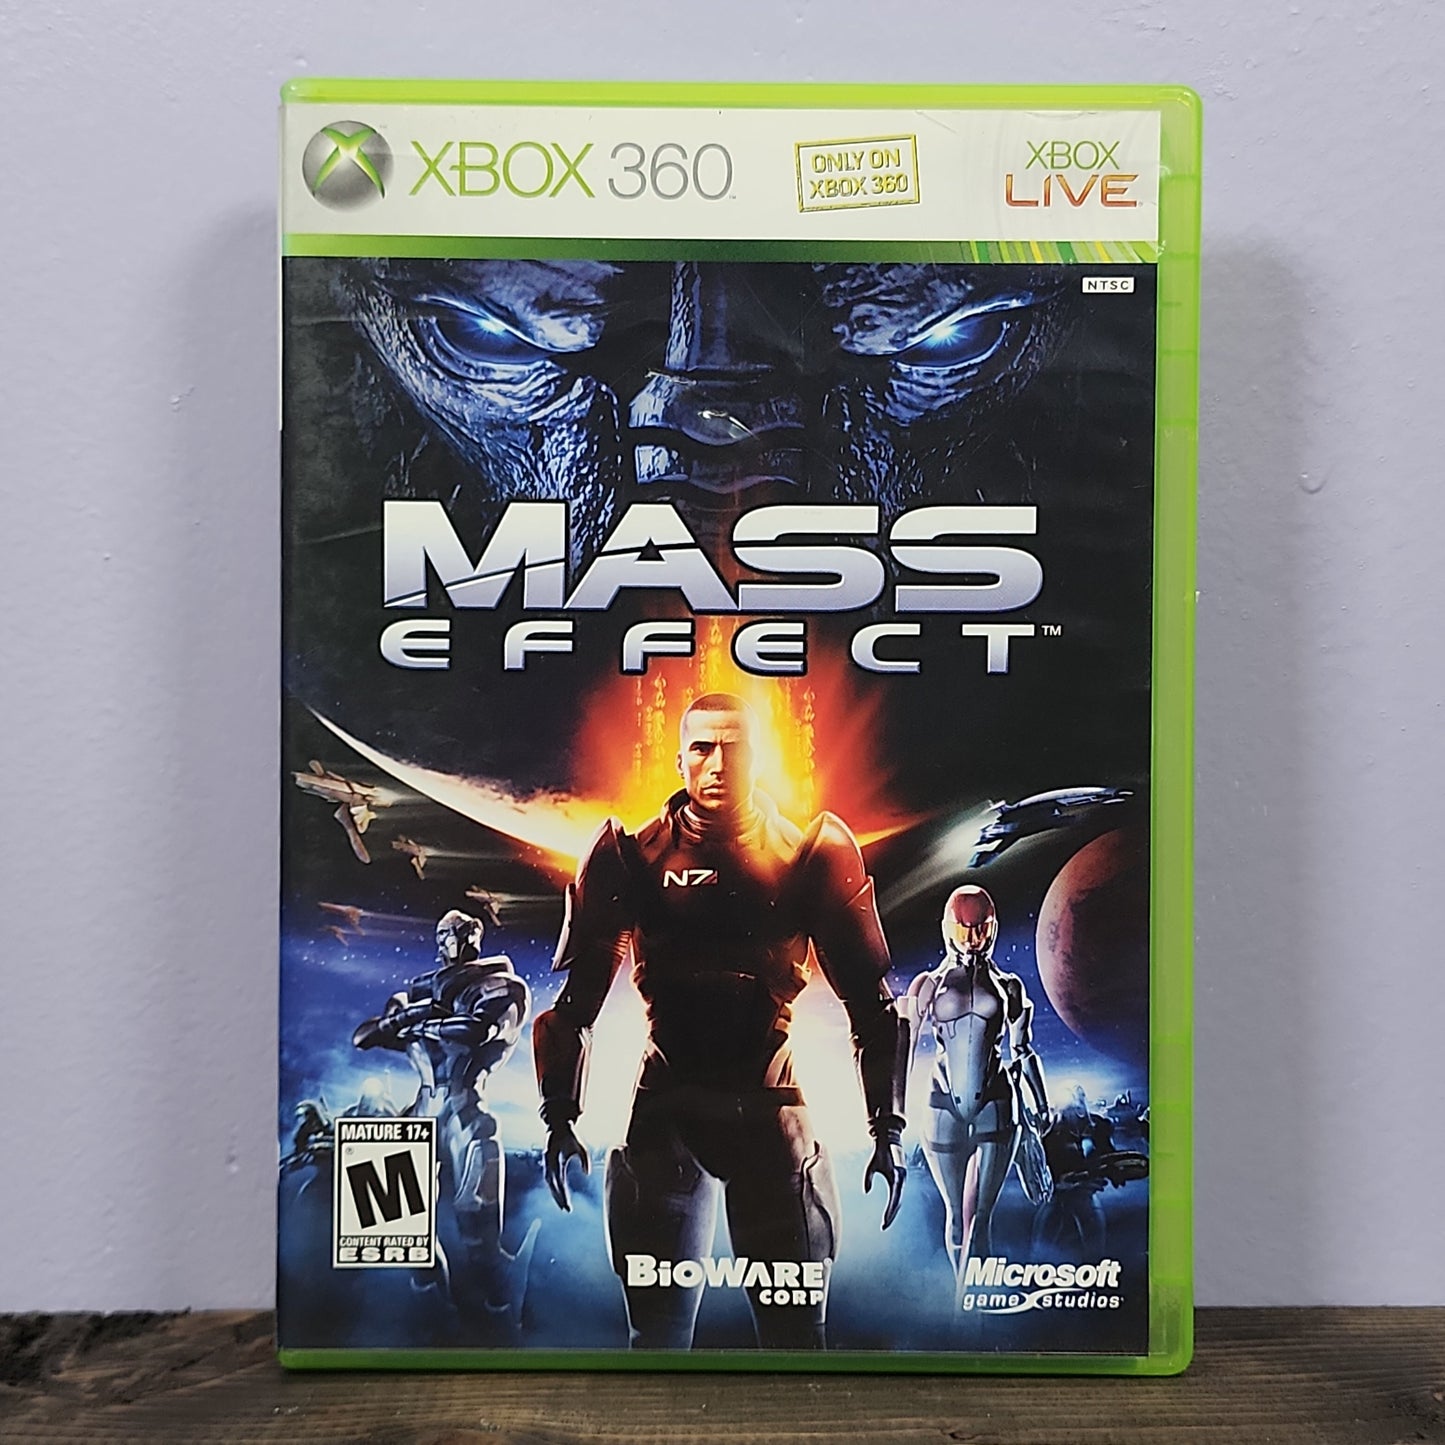 Xbox 360 - Mass Effect Retrograde Collectibles BioWare, Choices Matter, CIB, M Rated, Mass Effect Series, Microsoft Game Studios, RPG, Sci-Fi, Sing Preowned Video Game 